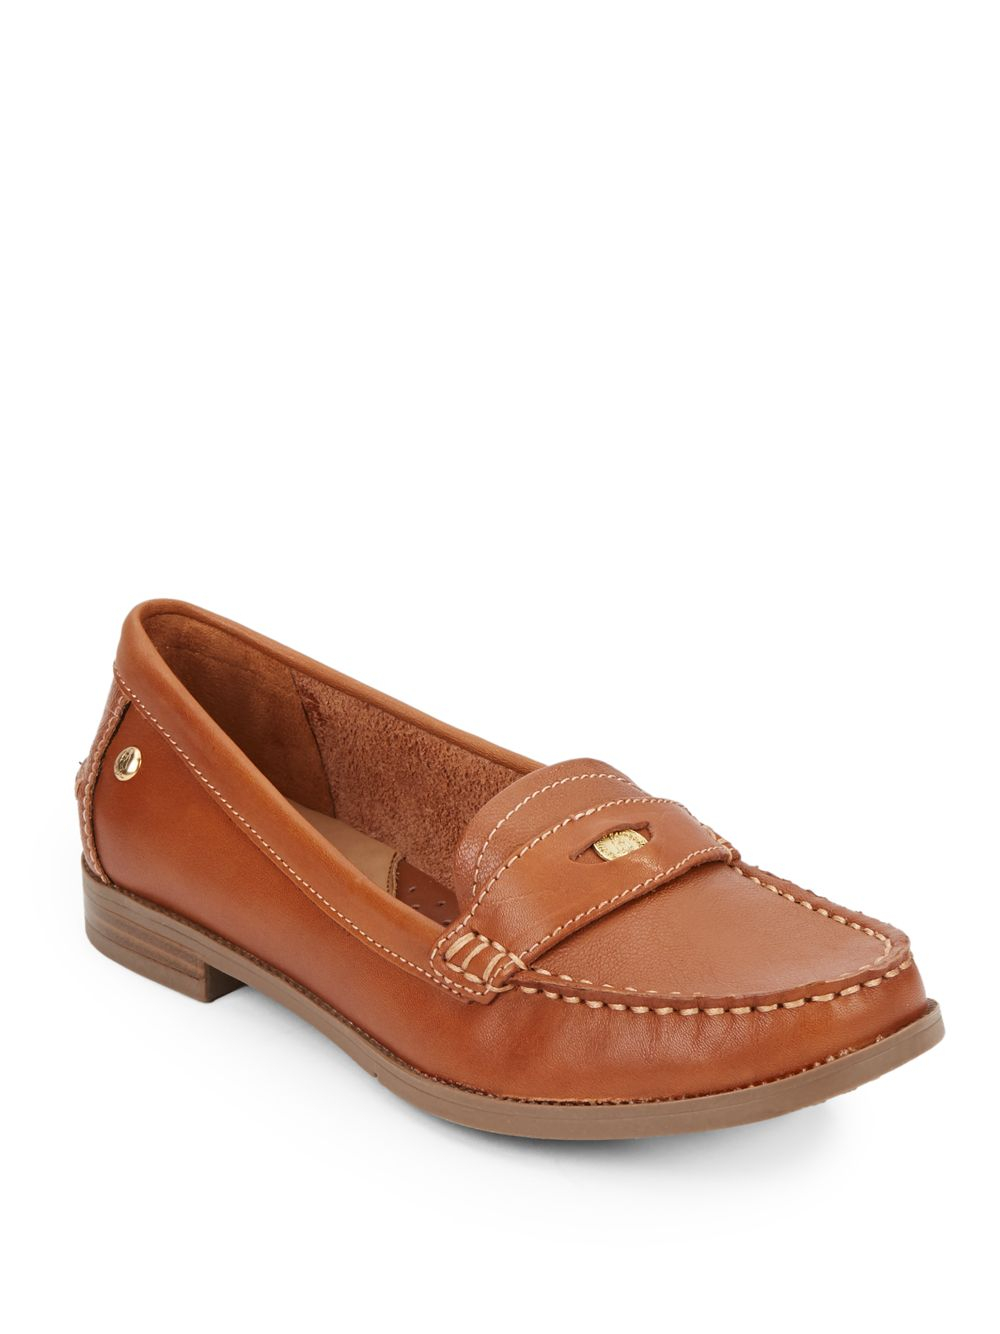 Hush Puppies Loafers : Hush Puppies Loafers Shoes Mens Tan Leather ...